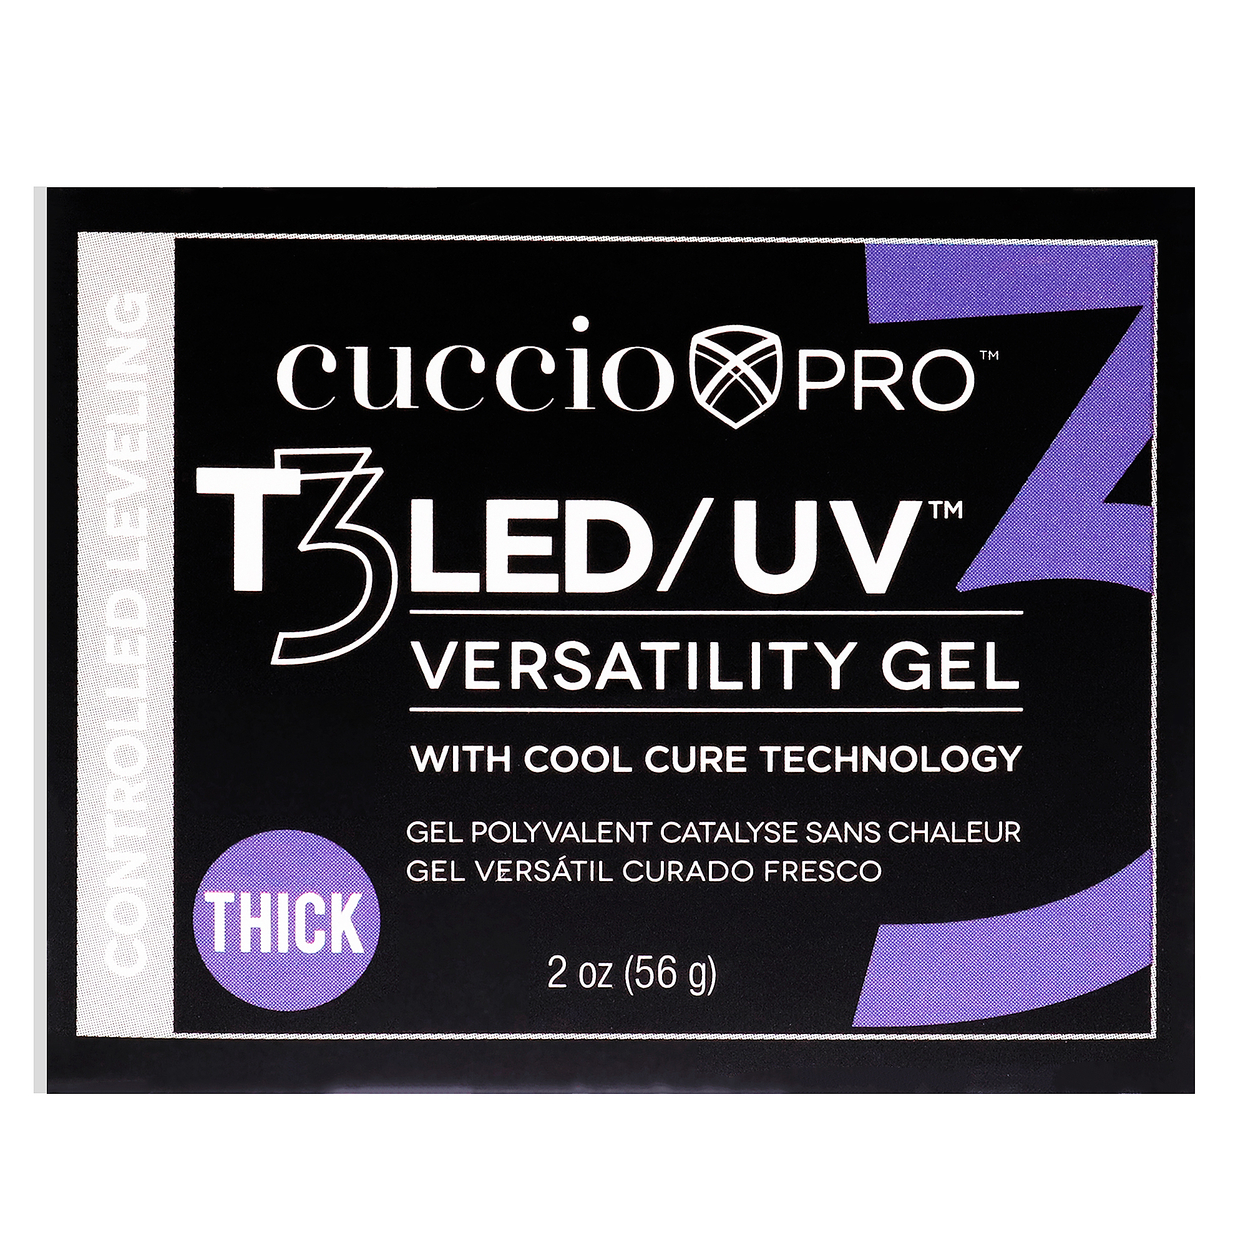 Cuccio Pro T3 Cool Cure Versatility Gel - Controlled Leveling Opaque Blush Pink Nail Gel 2 Oz